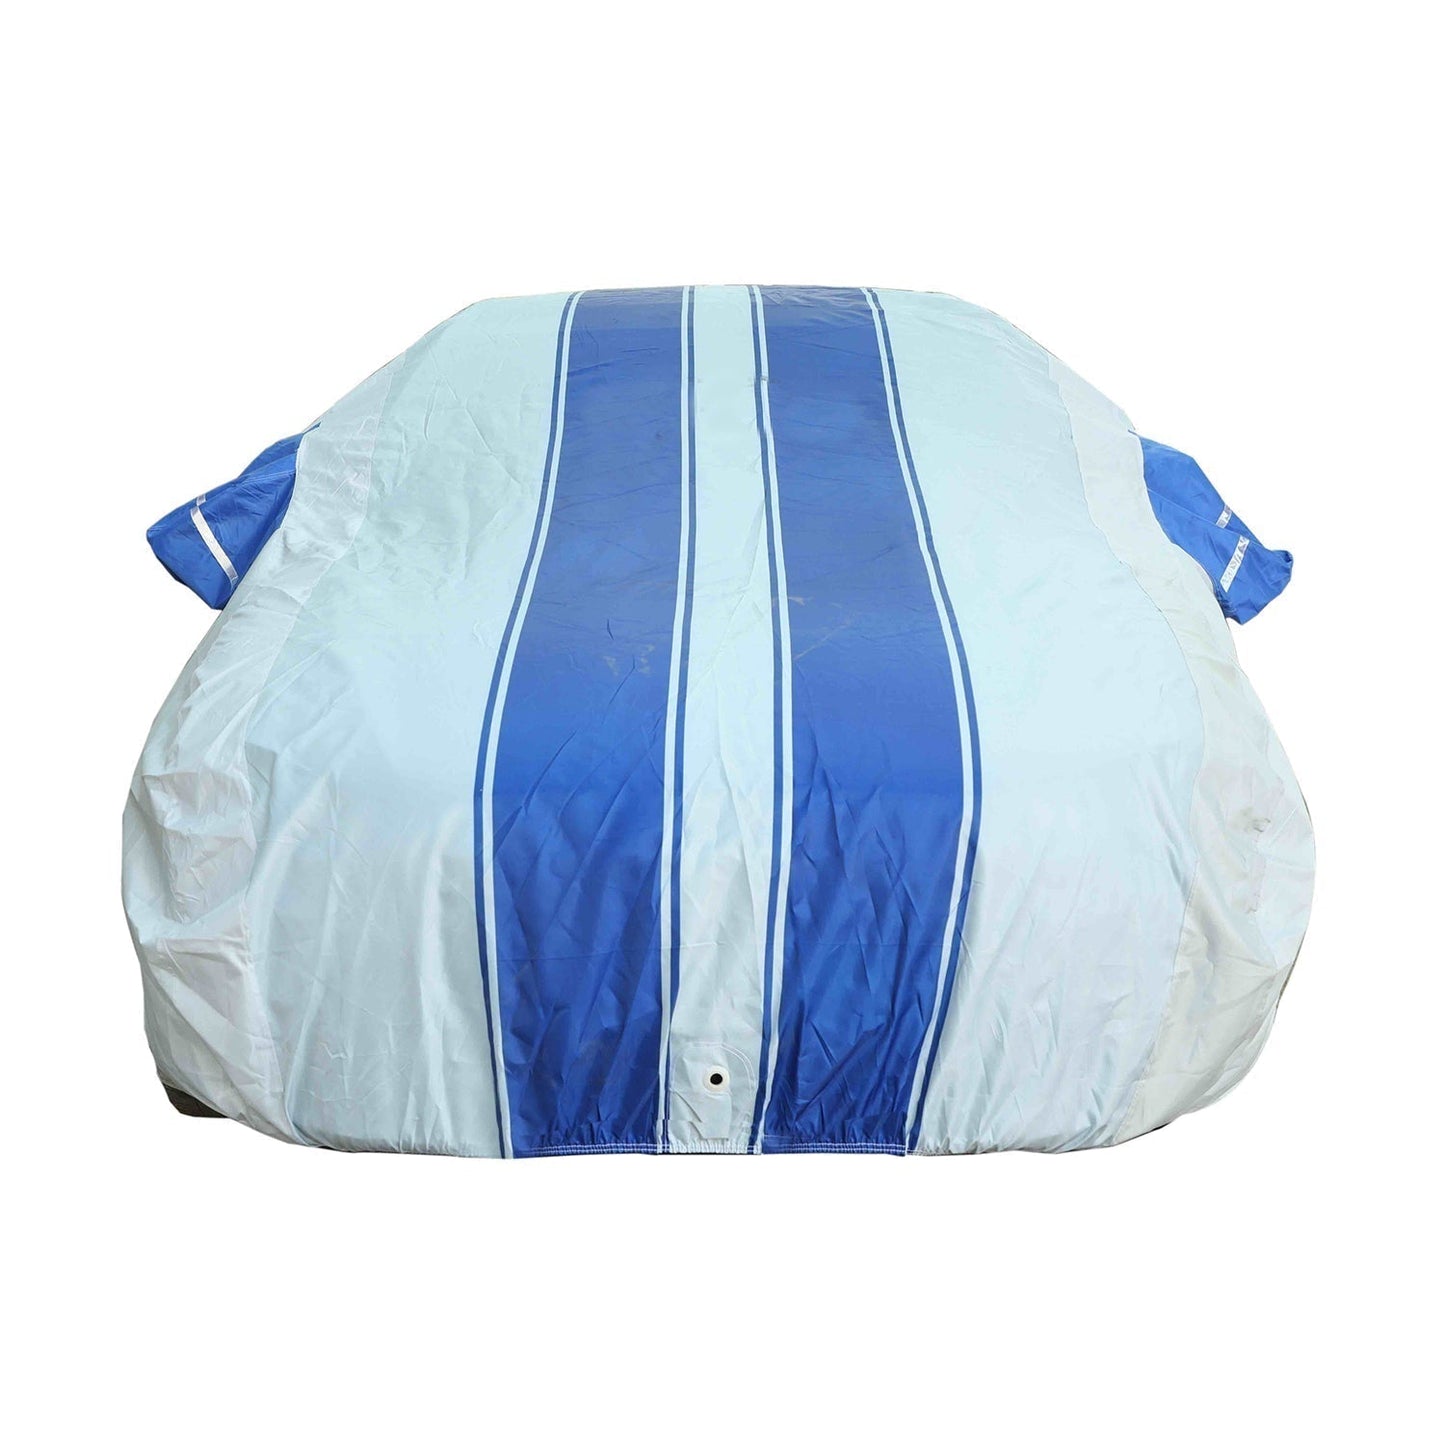 Oshotto 100% Blue dustproof and Water Resistant Car Body Cover with Mirror Pockets For Toyota Camry